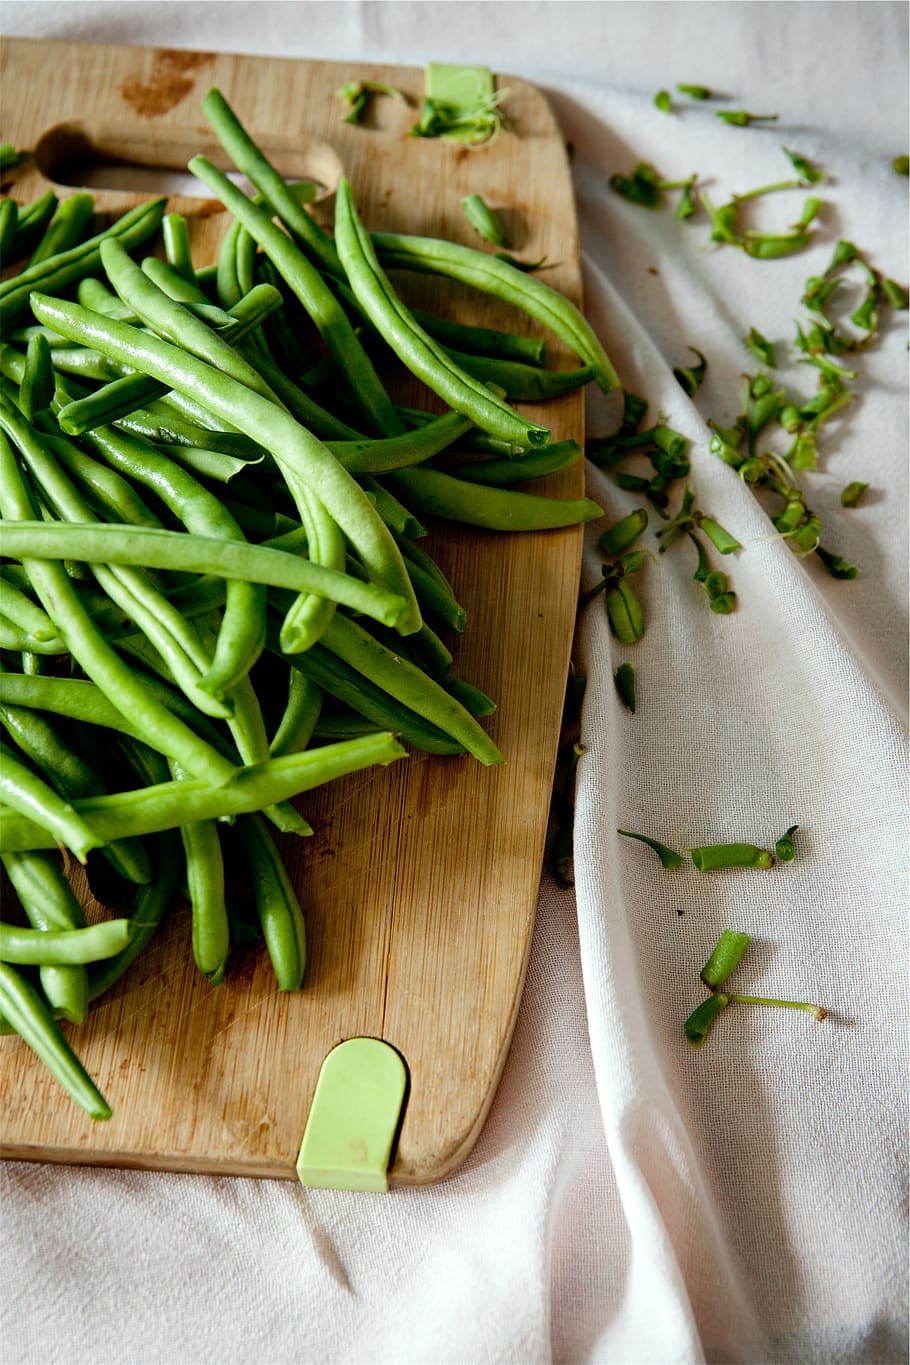 green, beans, vegetables, healthy, food, cutting board, food and drink, freshness, vegetable, healthy eating